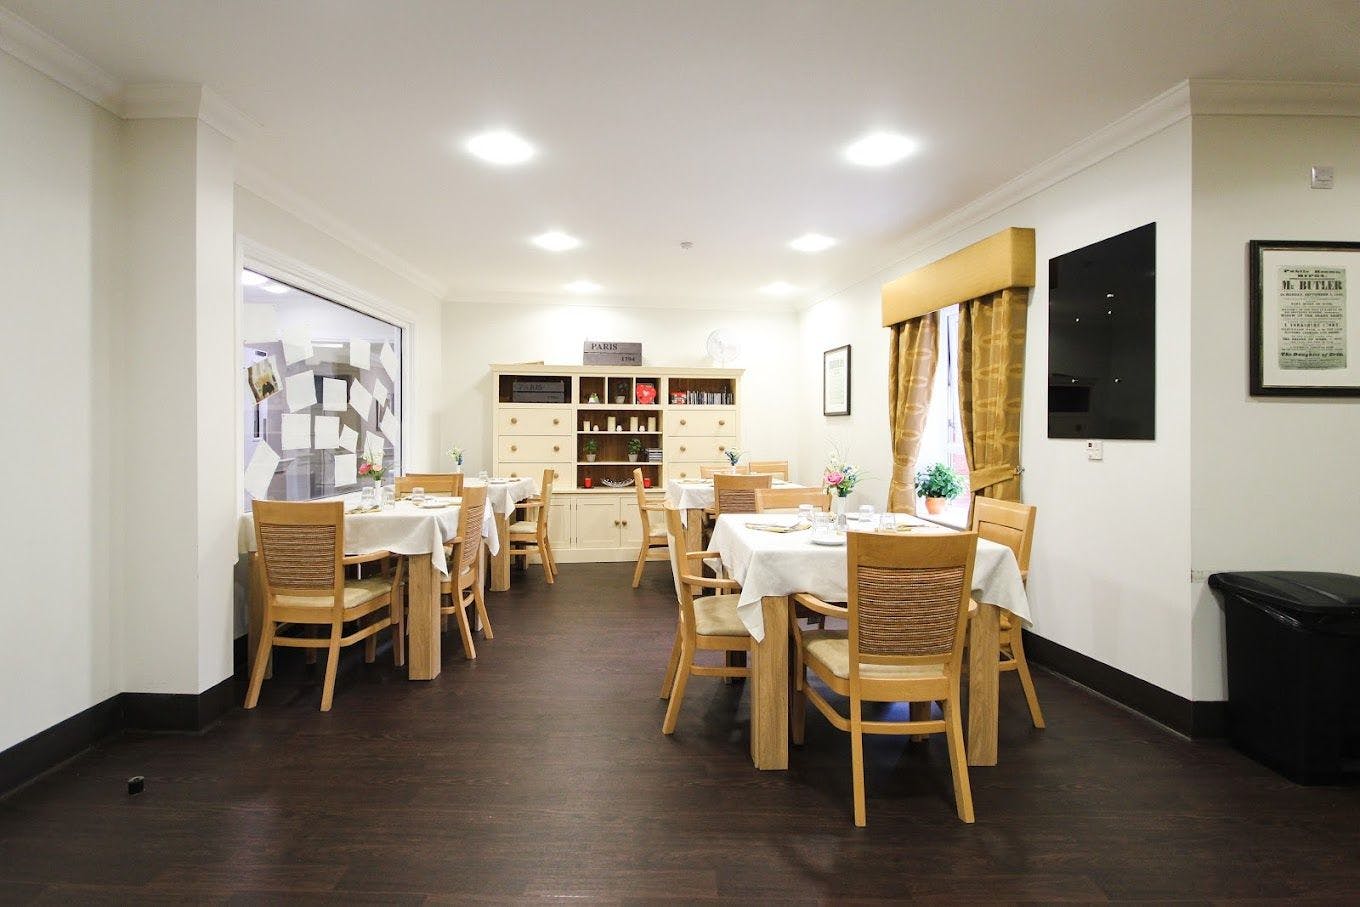 Dining room of The Moors care home in Ripon, Yorkshire